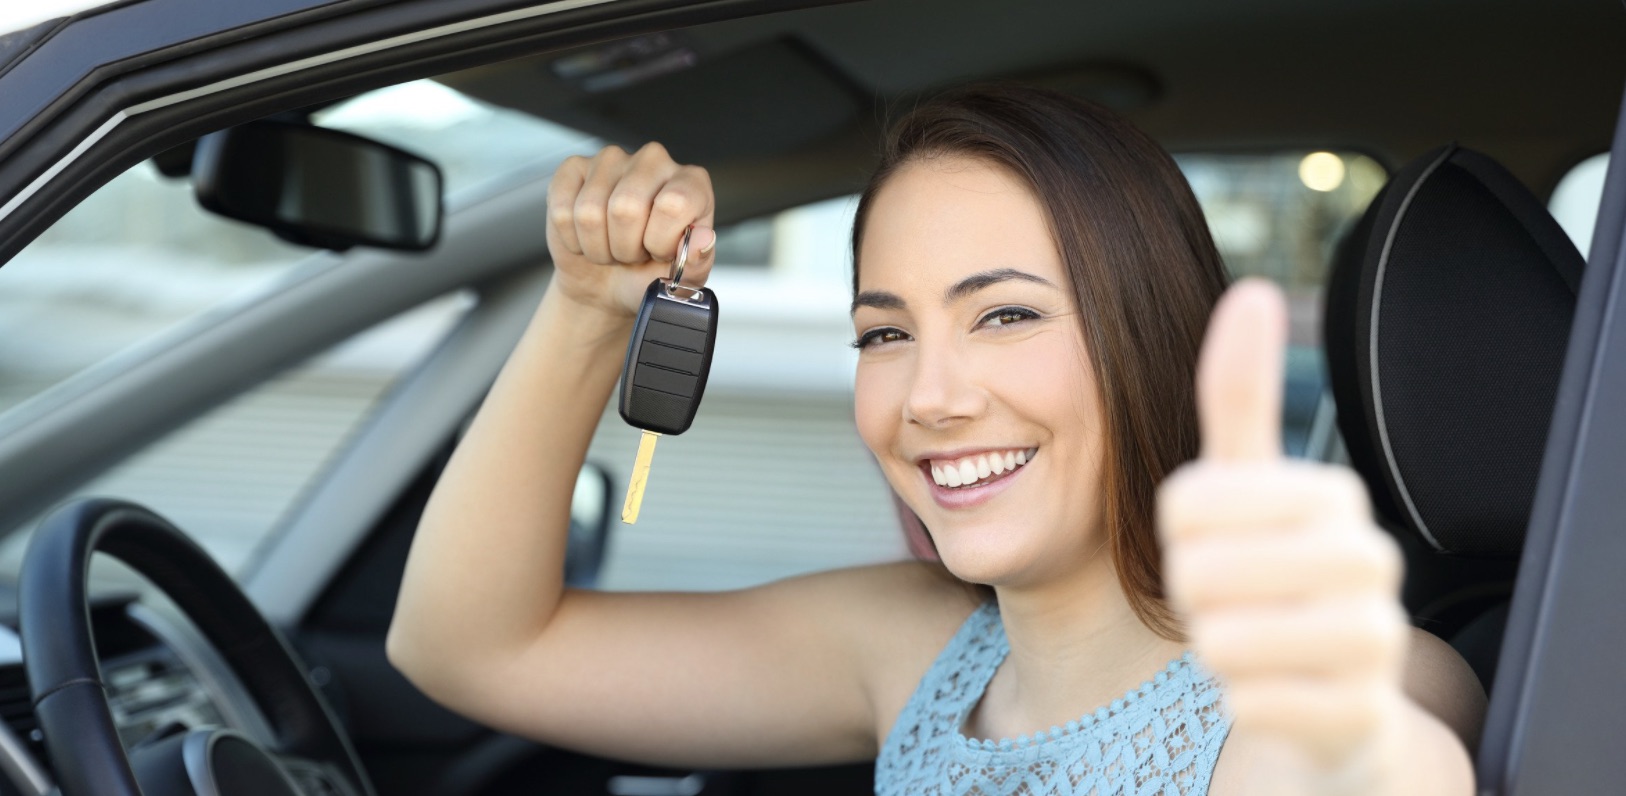 5 Things to consider before applying for a car loan 73703 1 - 5 Things to consider before applying for a car loan